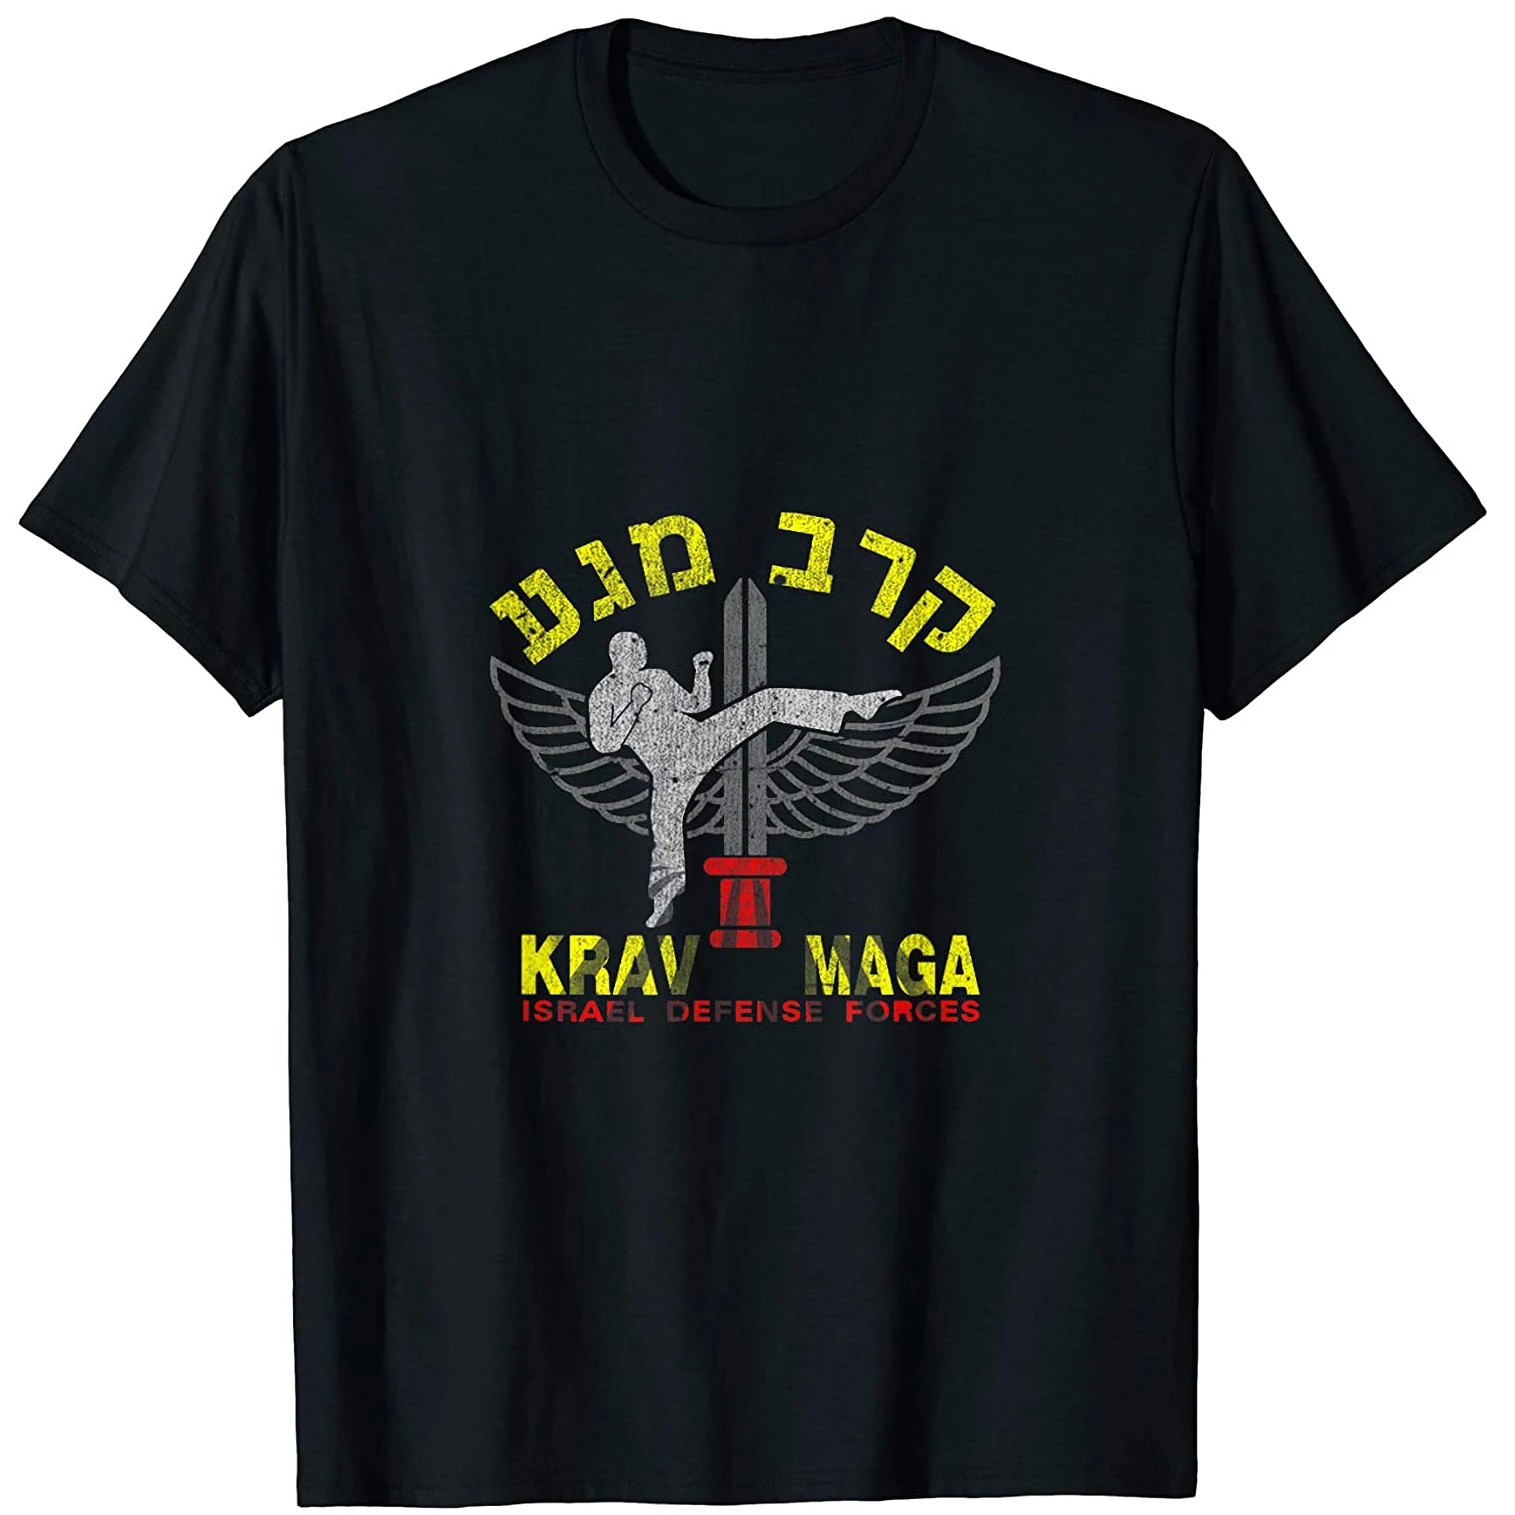 

Israel Self Defense Martial Art Krav Maga Combat System T Shirt High Quality Cotton, Large Sizes, Breathable Top, Casual T-shirt